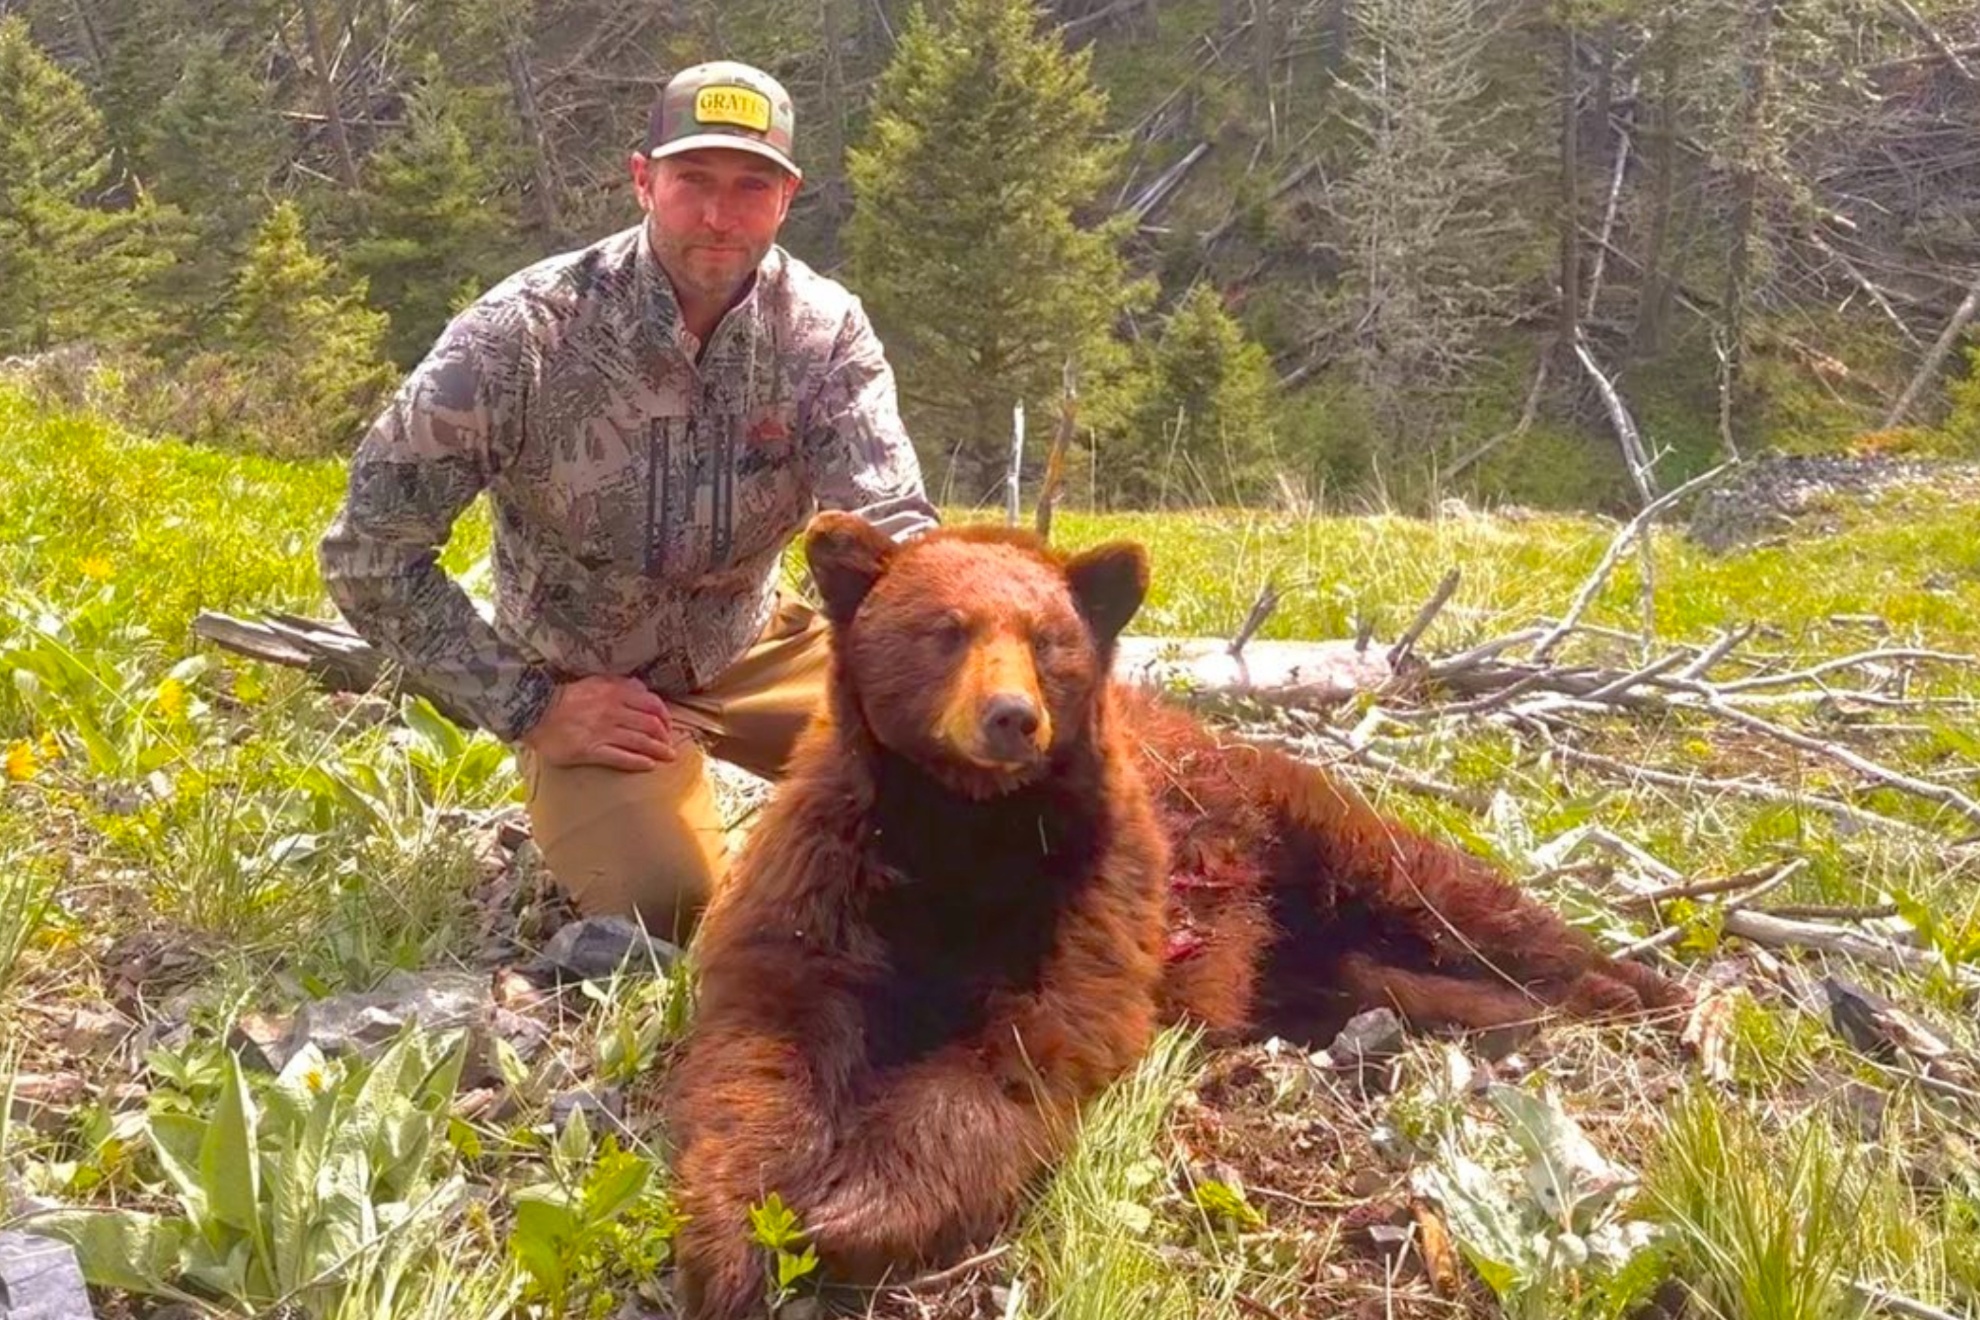 Jay Cutler, the Bears' killer: former NFL quarterback poses with a